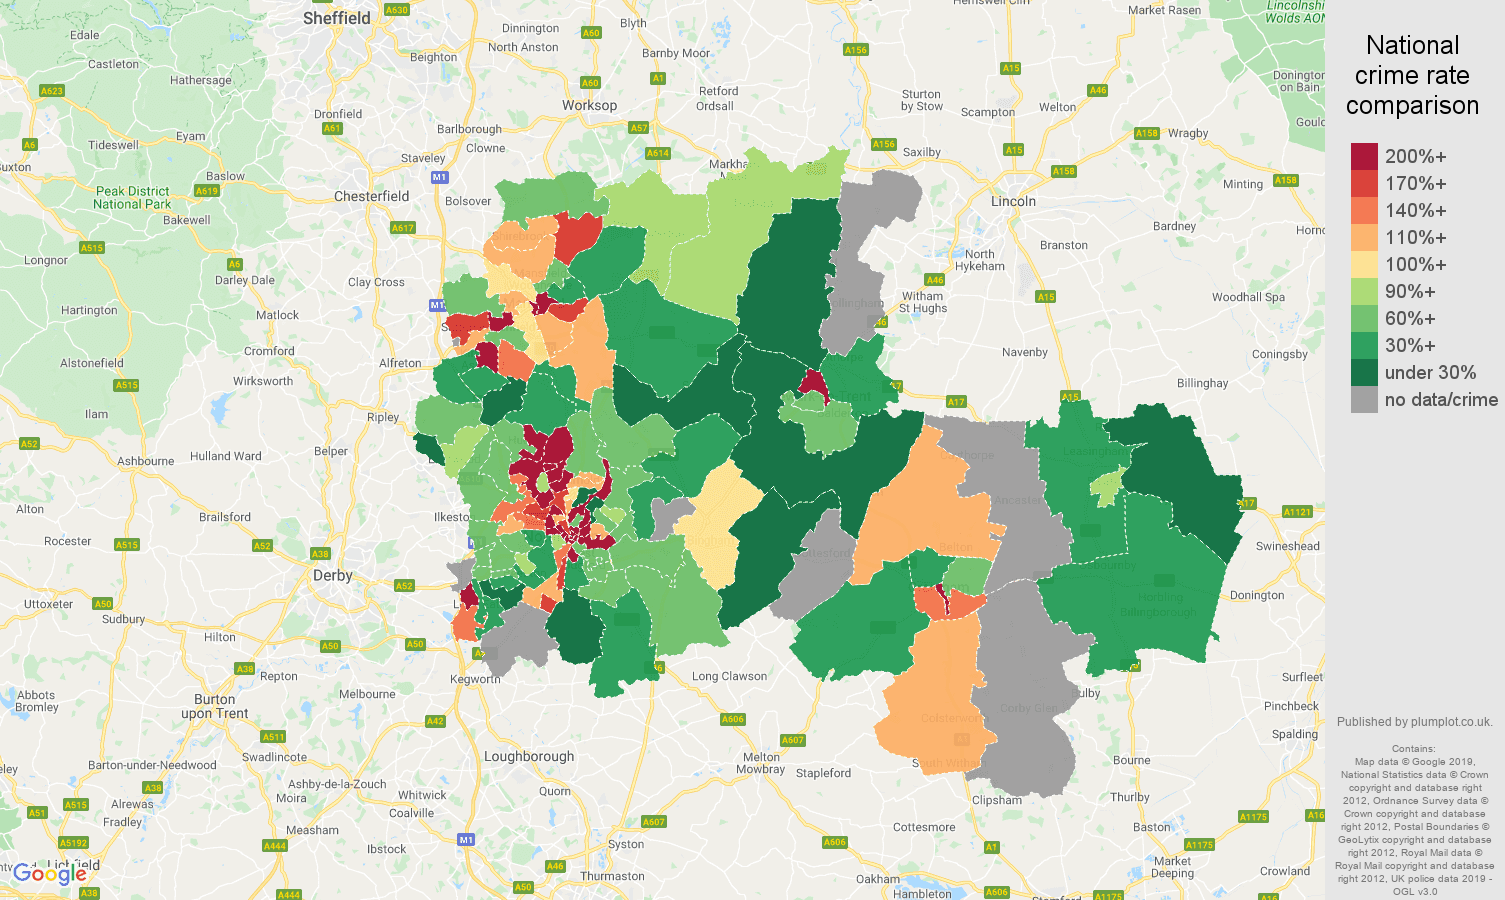 Nottingham possession of weapons crime rate comparison map